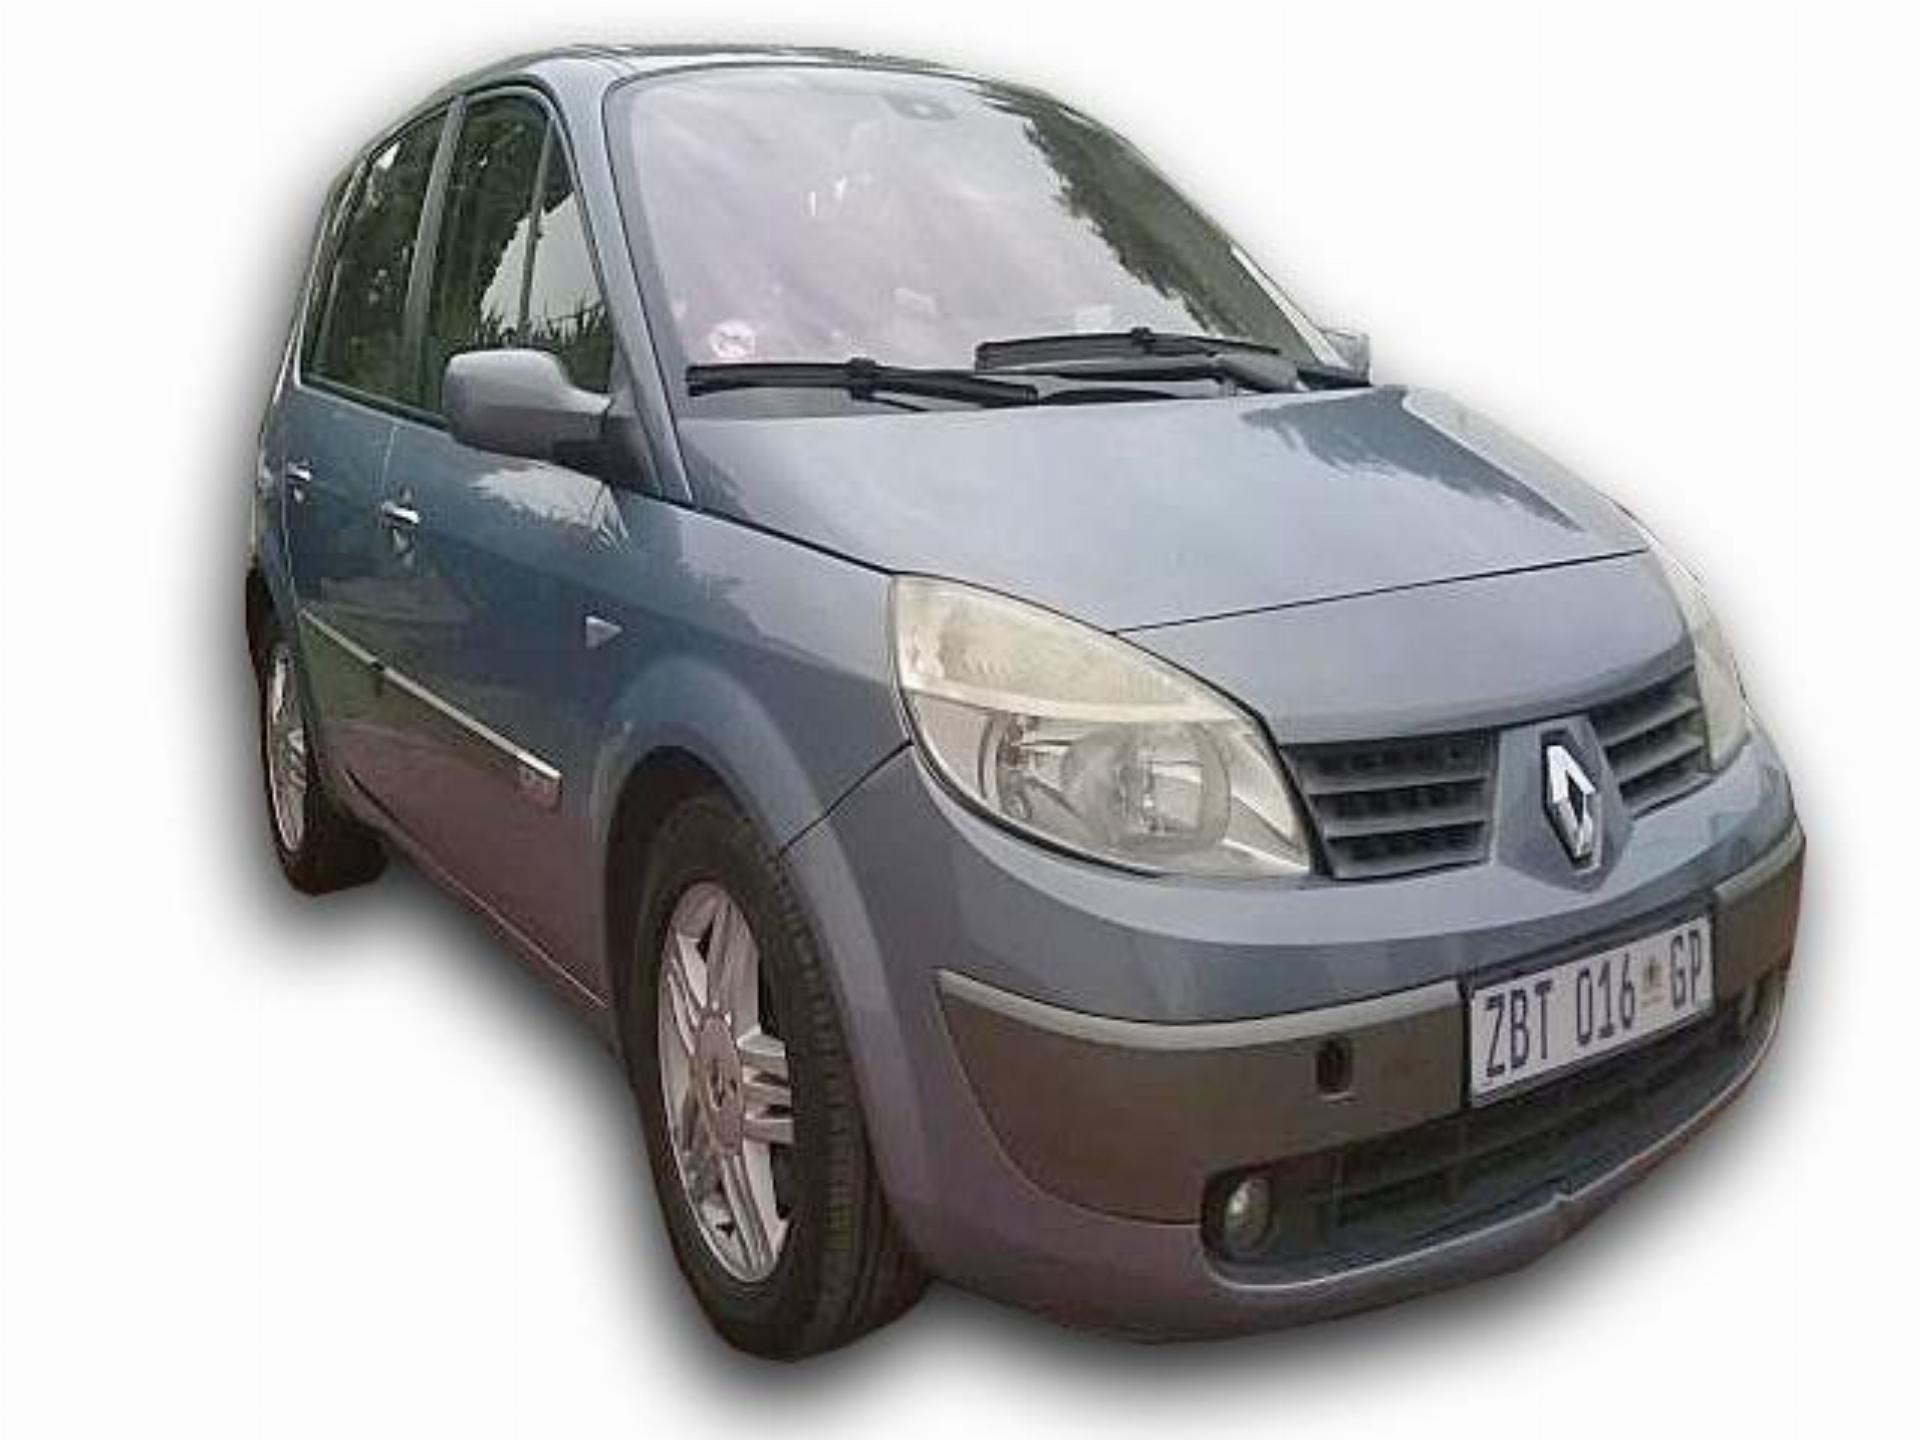 Used Renault Megane Scenic 2.0 L Auto 2005 on auction